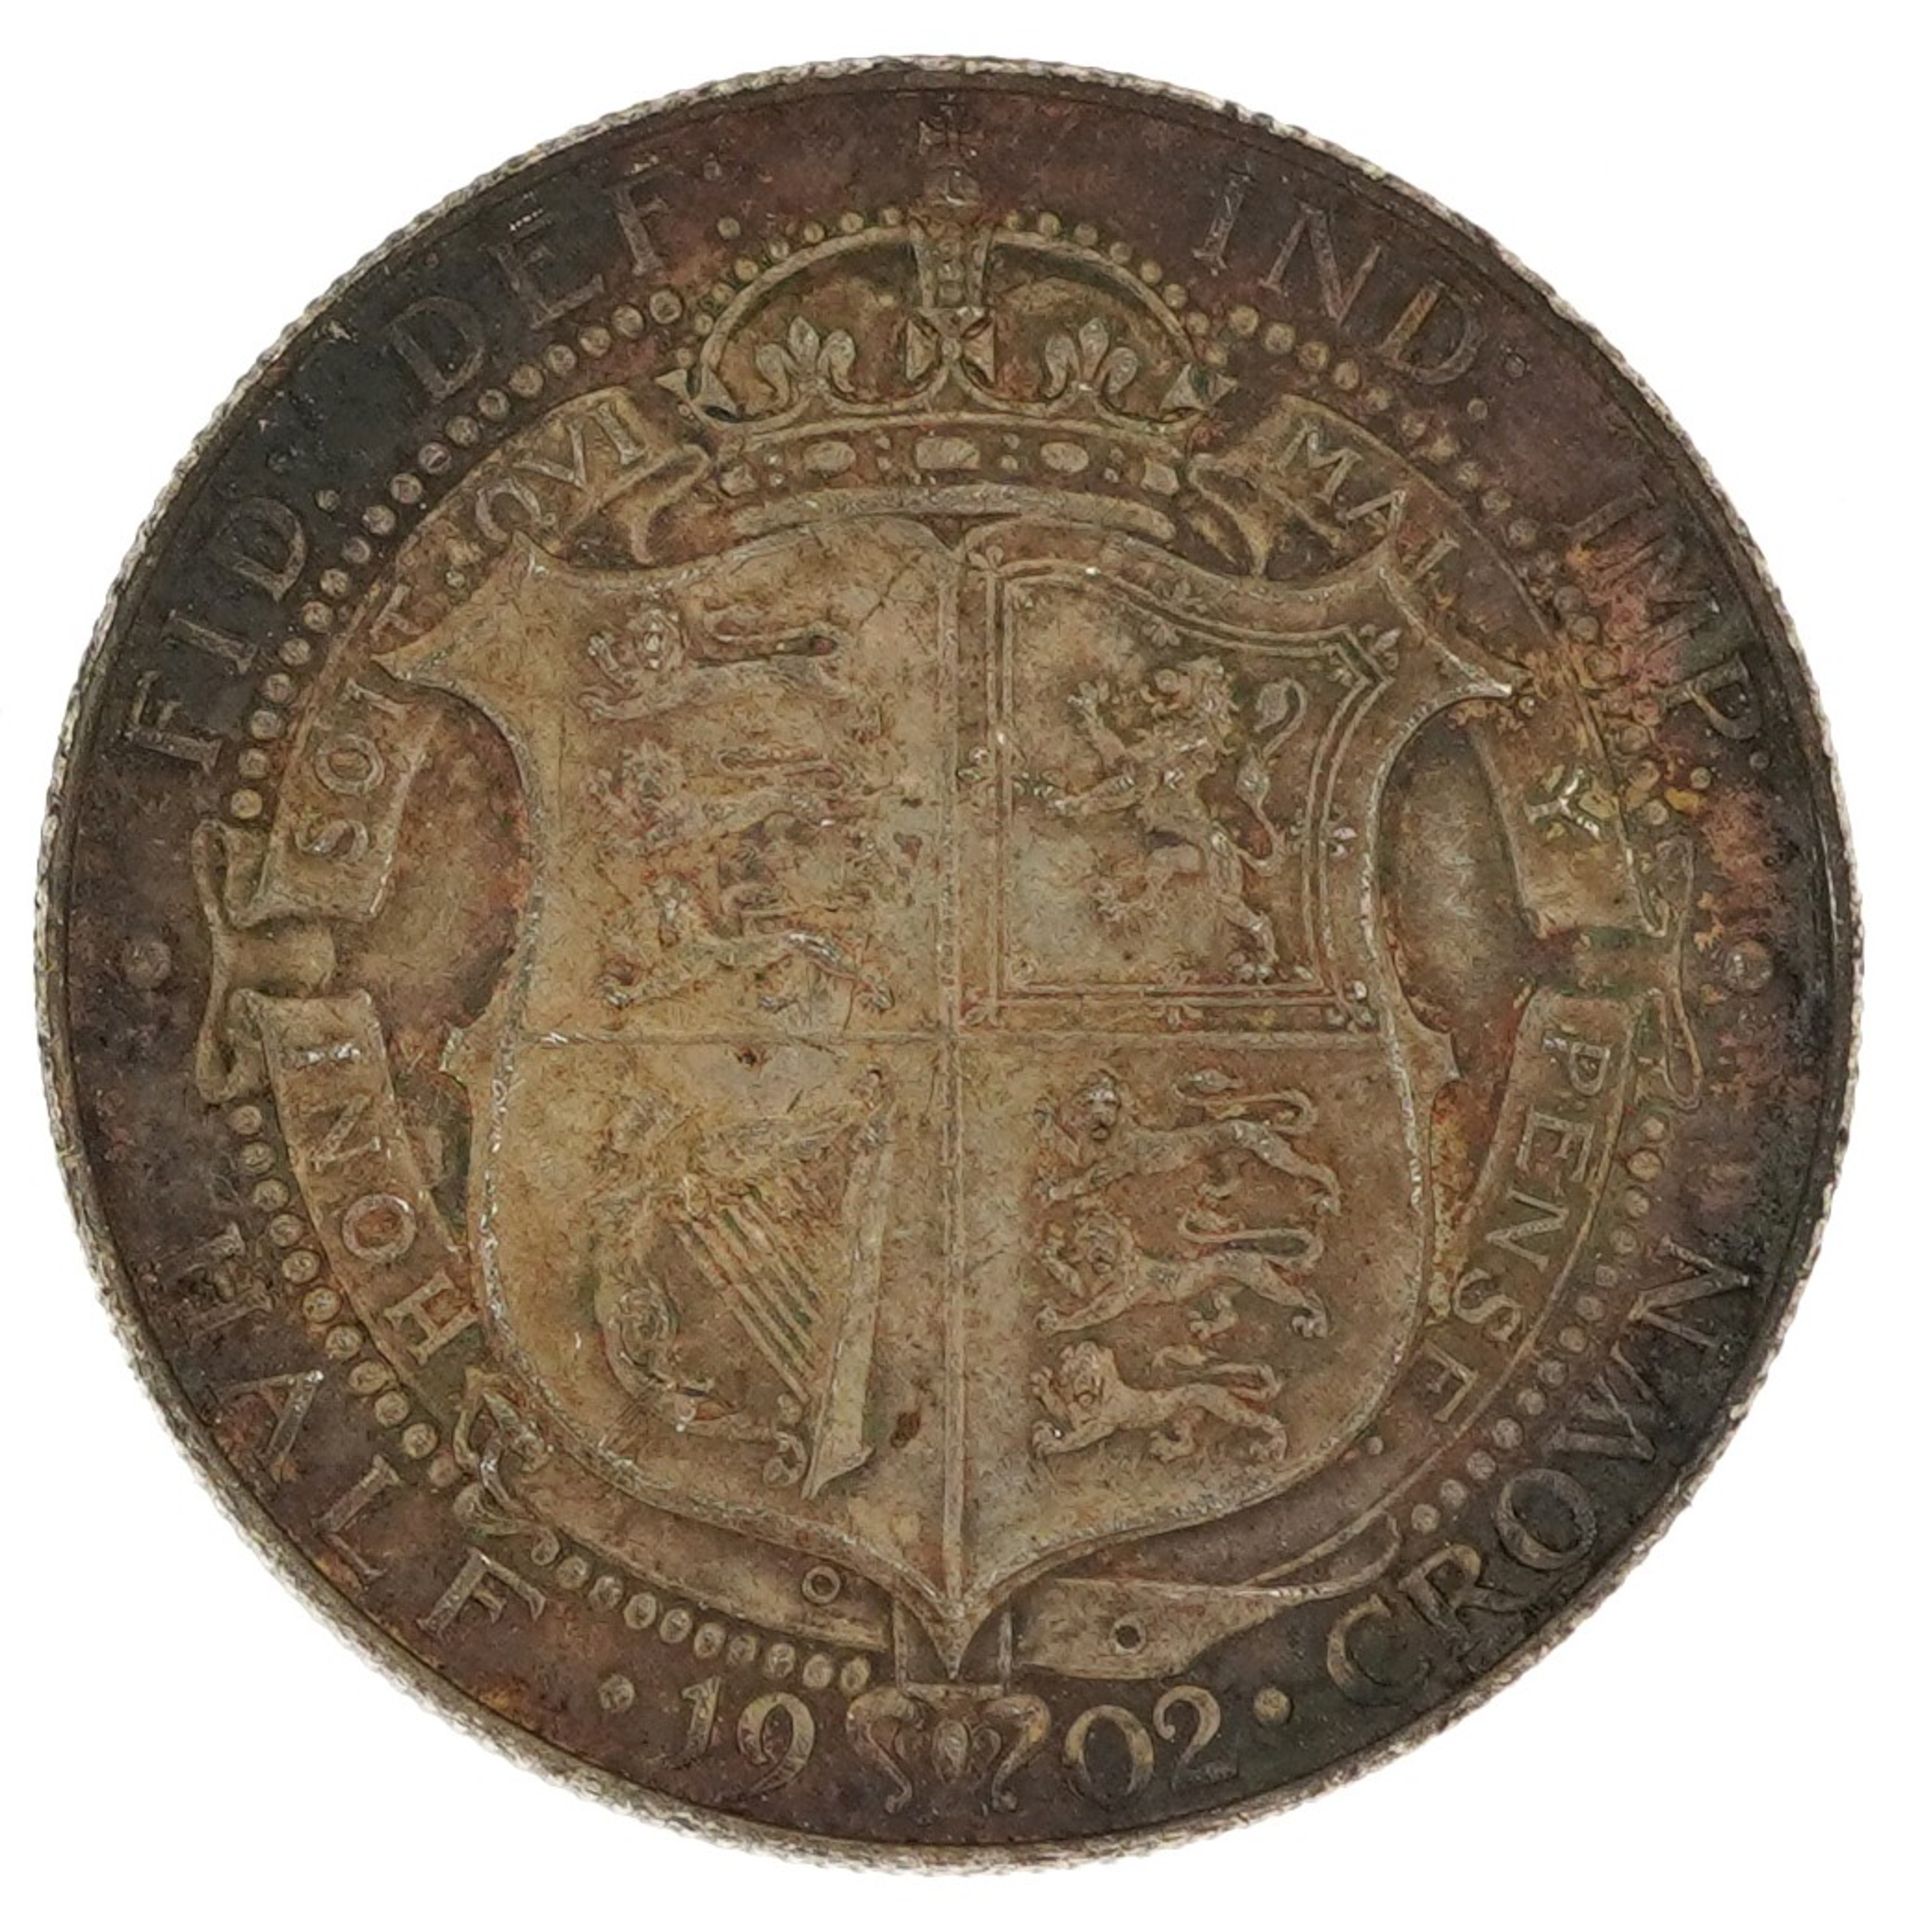 Edward VII 1902 silver half crown : For further information on this lot please visit